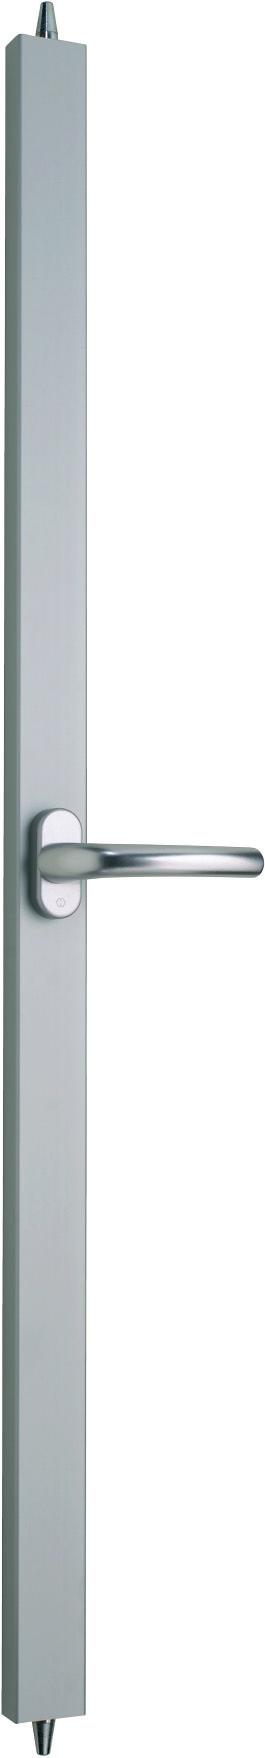 center): 1400mm Lock handle height (H): 1100mm Fits locks with CC (Y) (center to center distance) of: